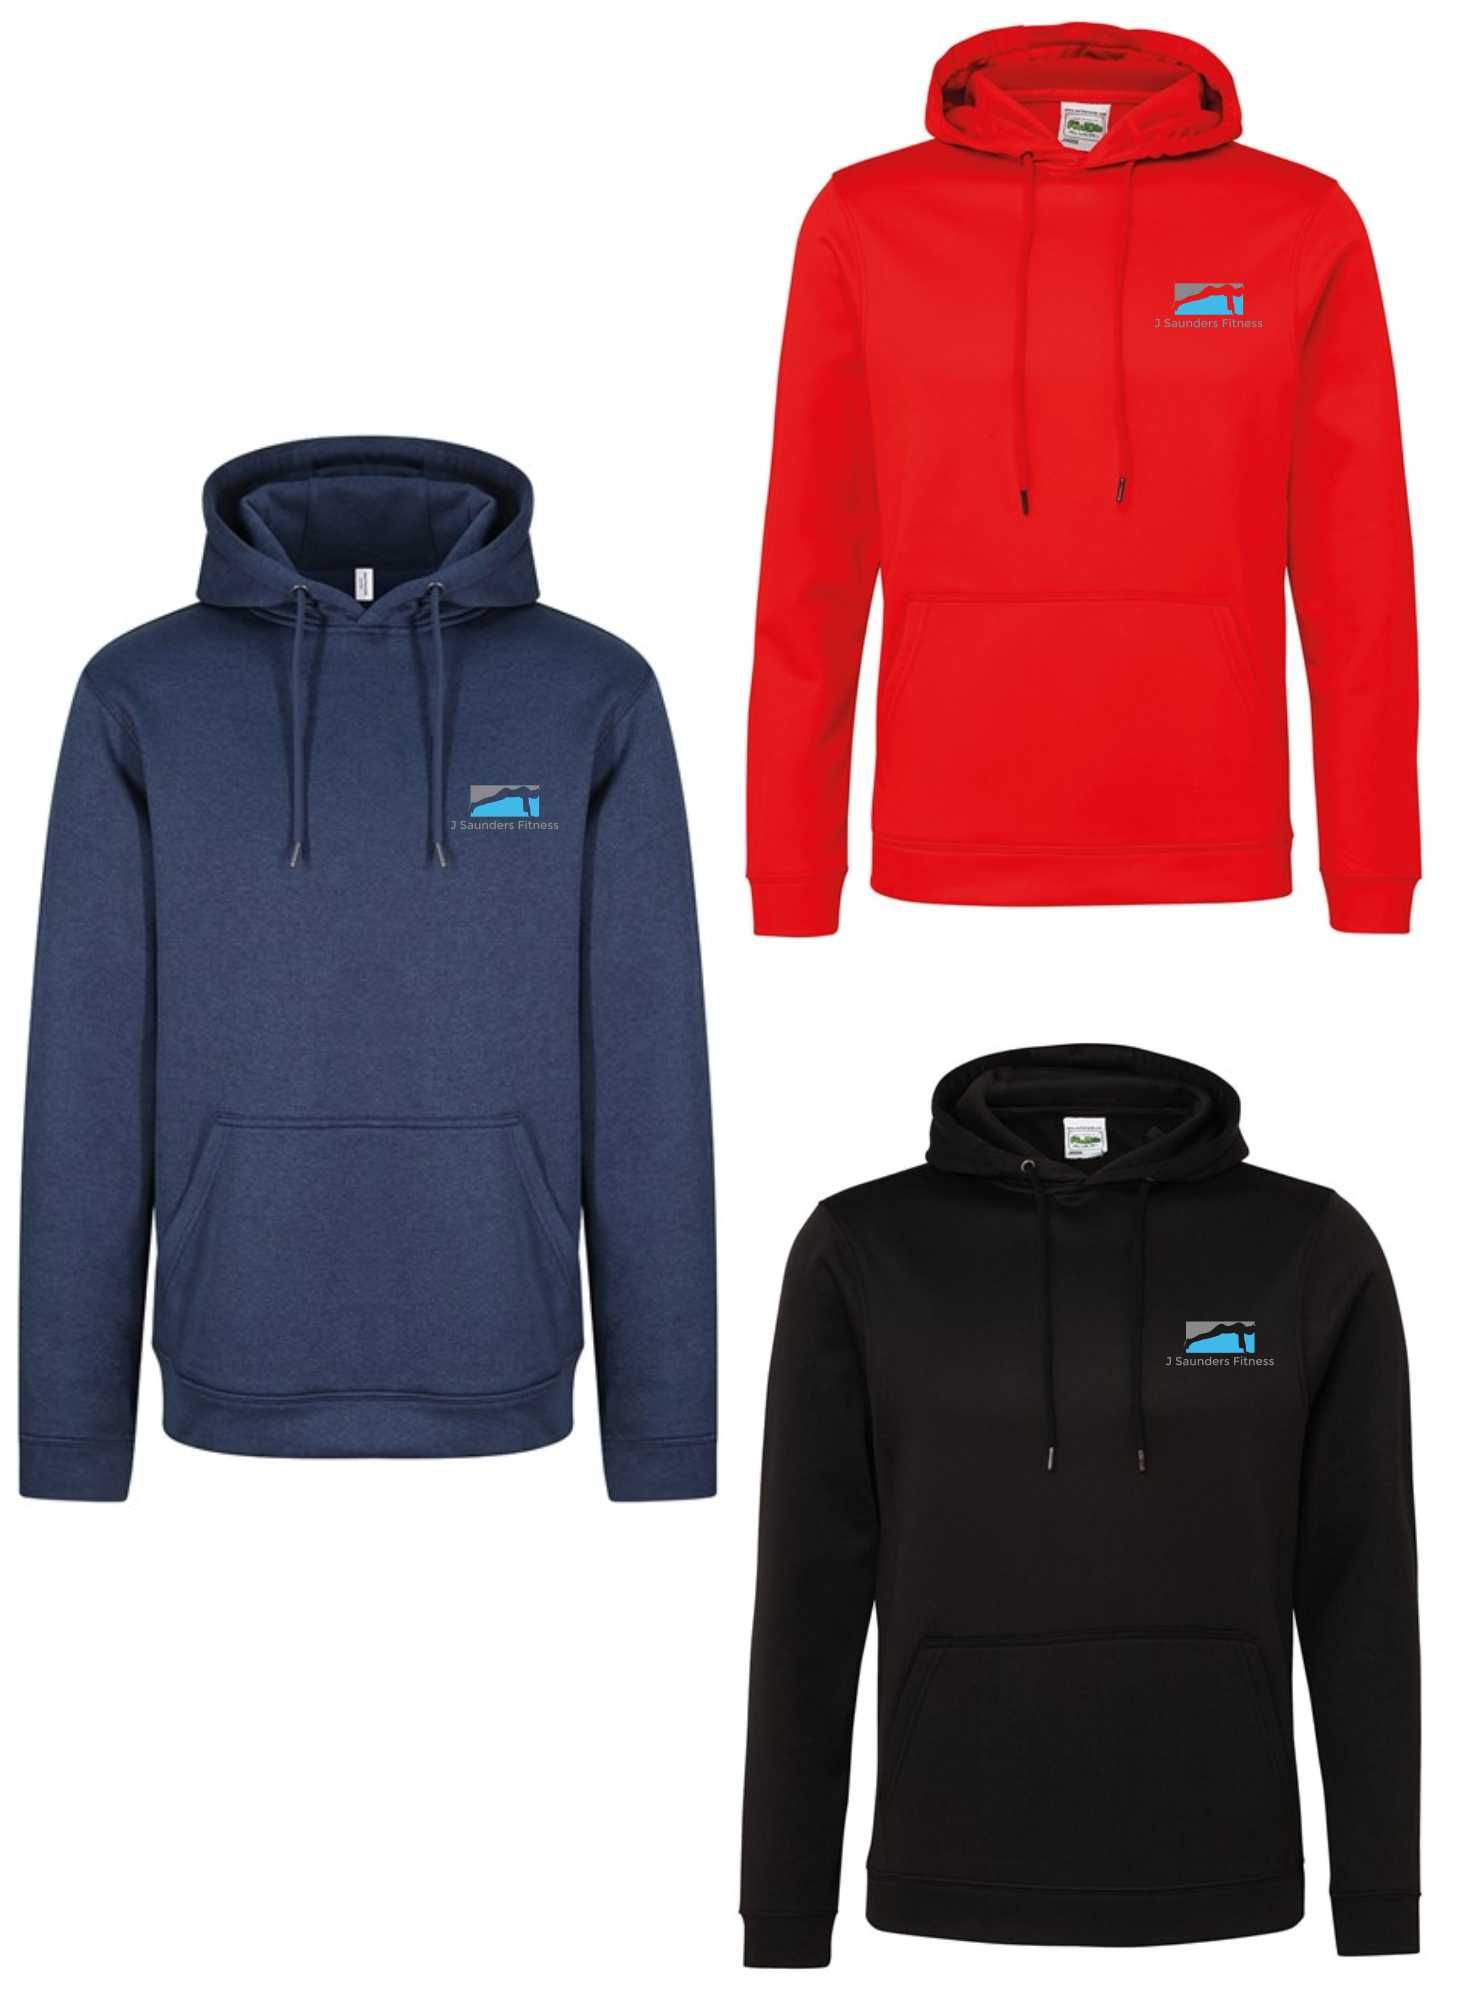 J Saunders Fitness- Polyester Unisex Sports Hoodie (Front & Back)